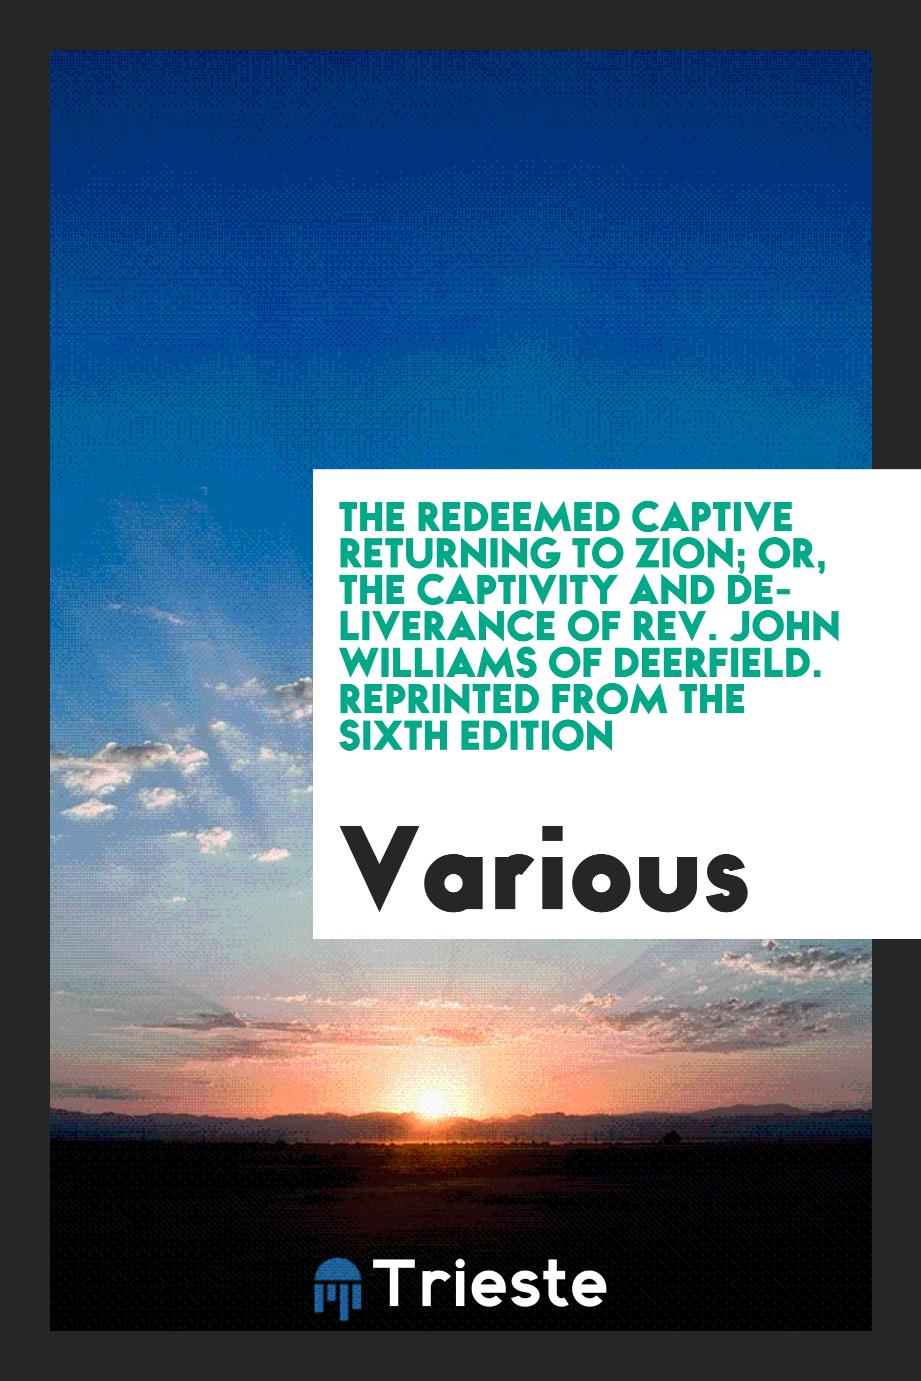 The redeemed captive returning to Zion; or, The captivity and deliverance of Rev. John Williams of Deerfield. Reprinted from the sixth edition